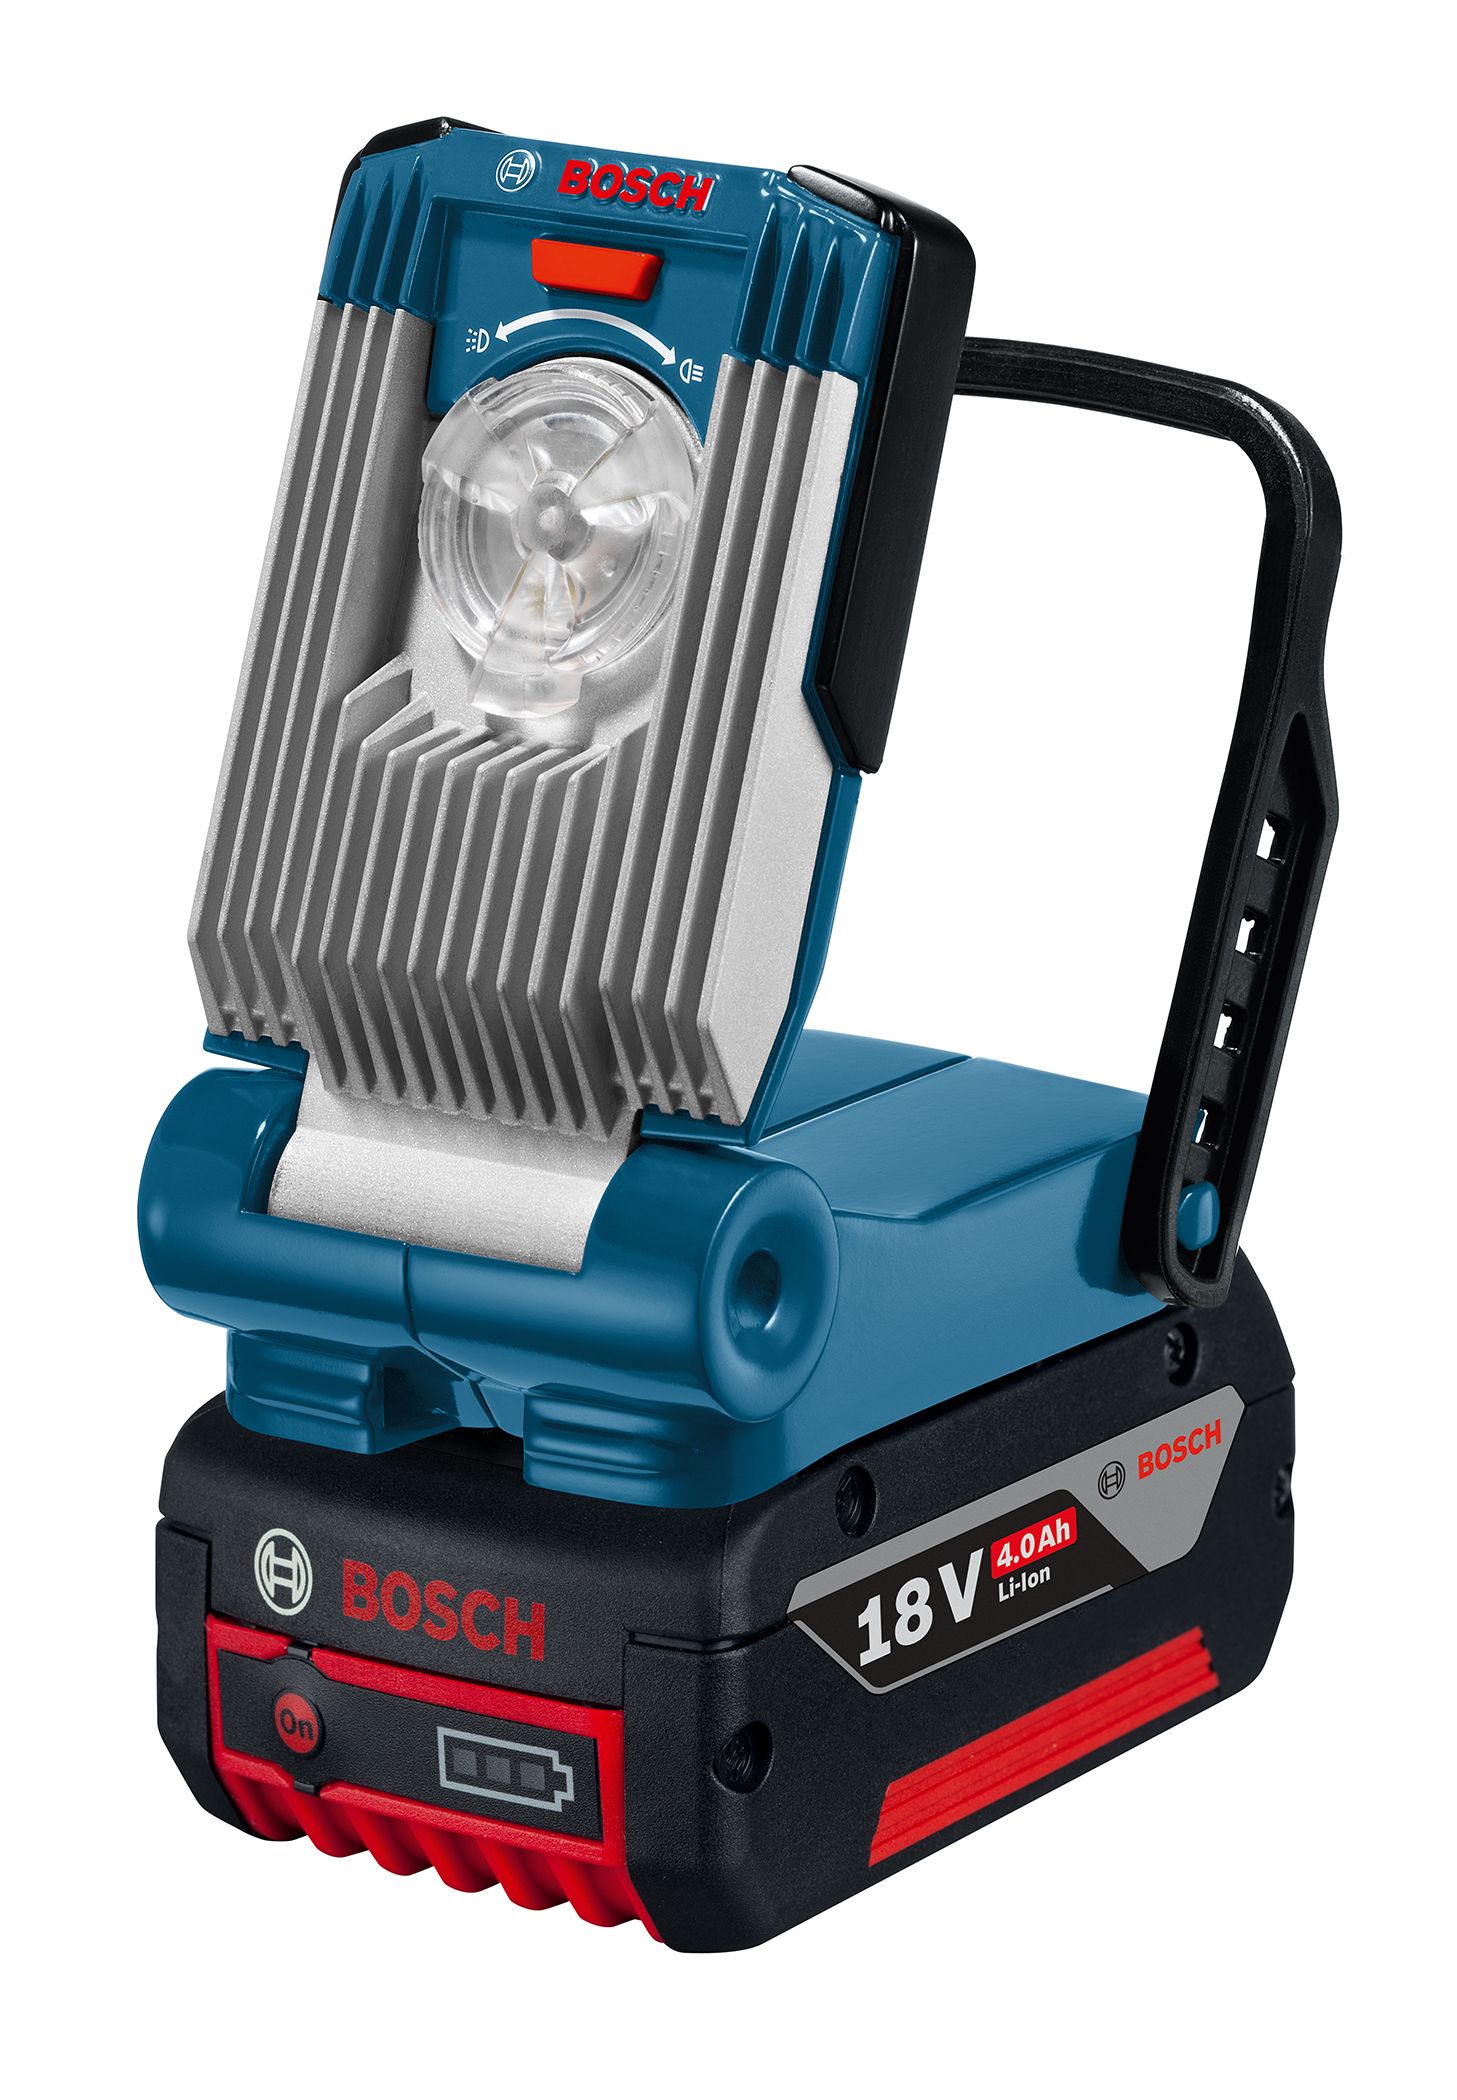 Bosch LED Work Light Plugs the You Already Have